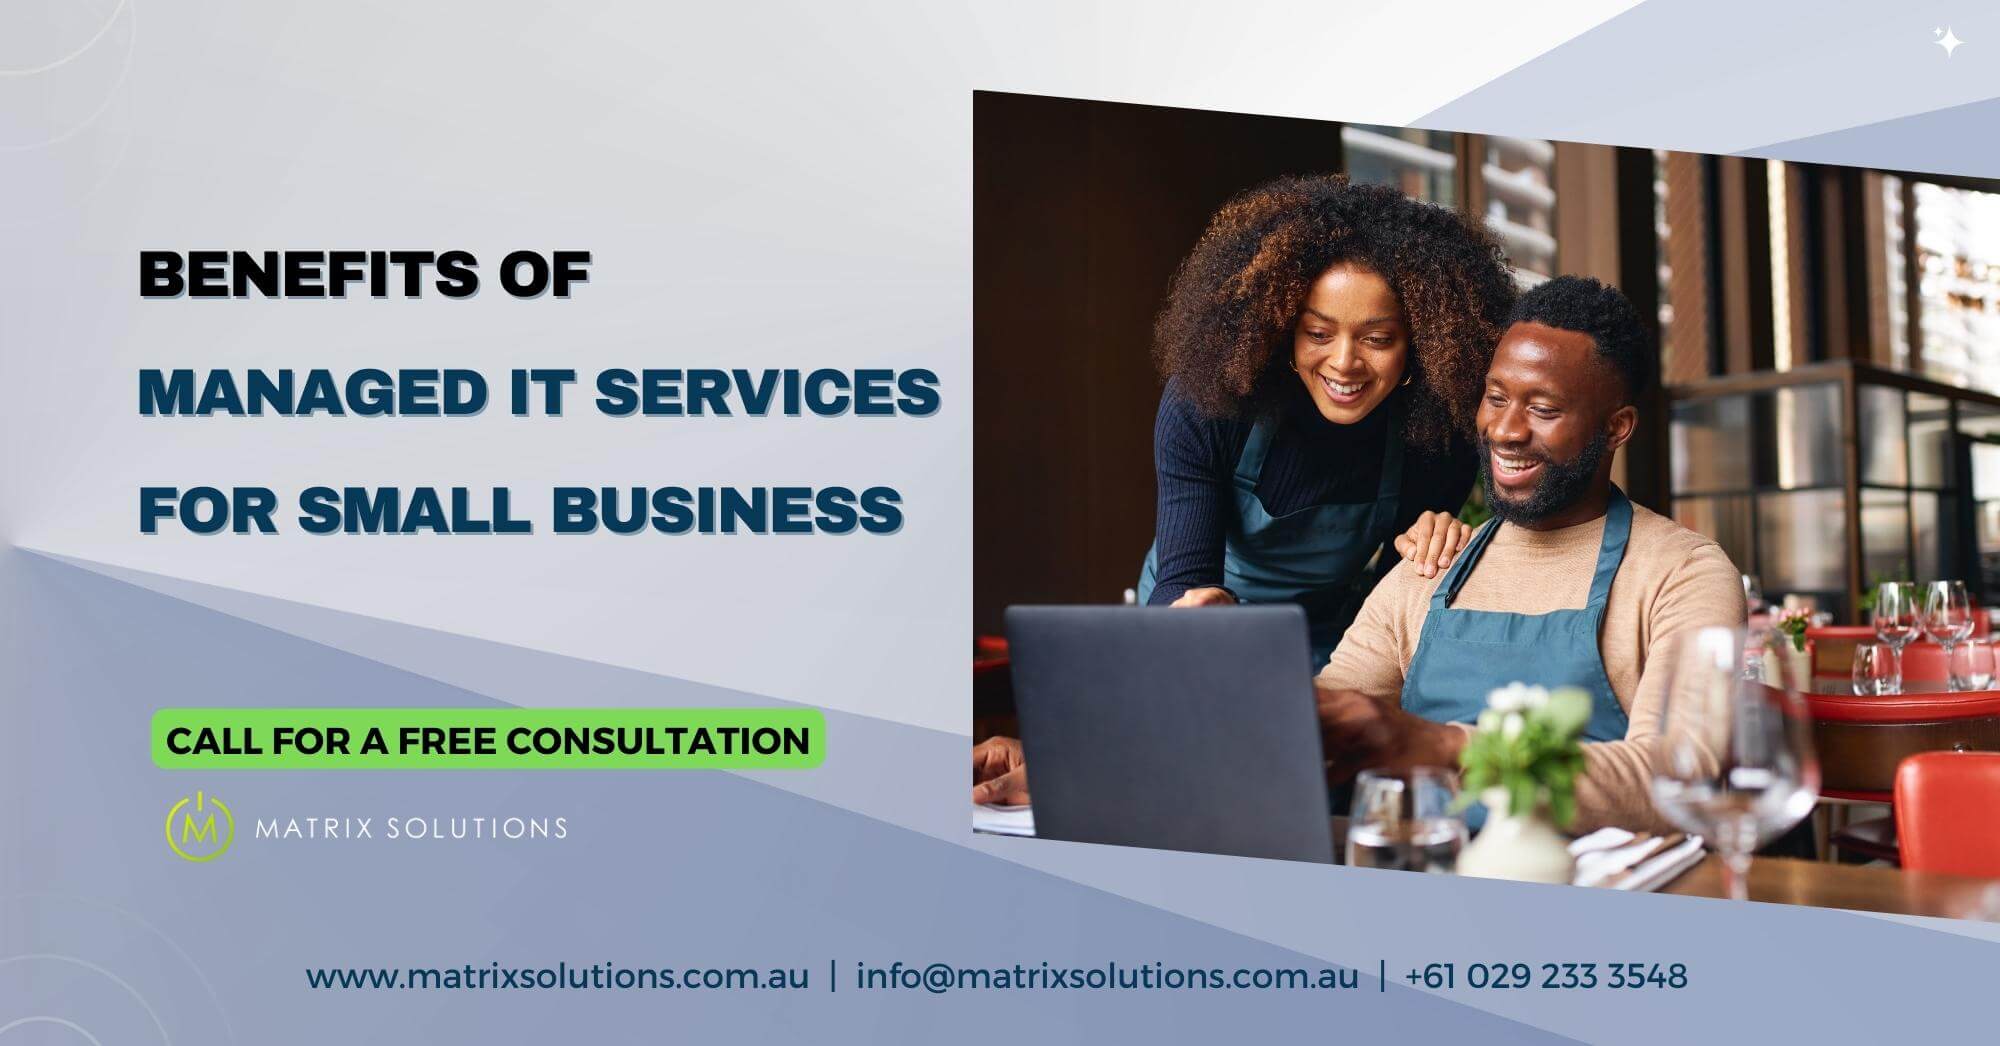 Matrix Solutions Australia Benefits of Managed IT Services for Small Business